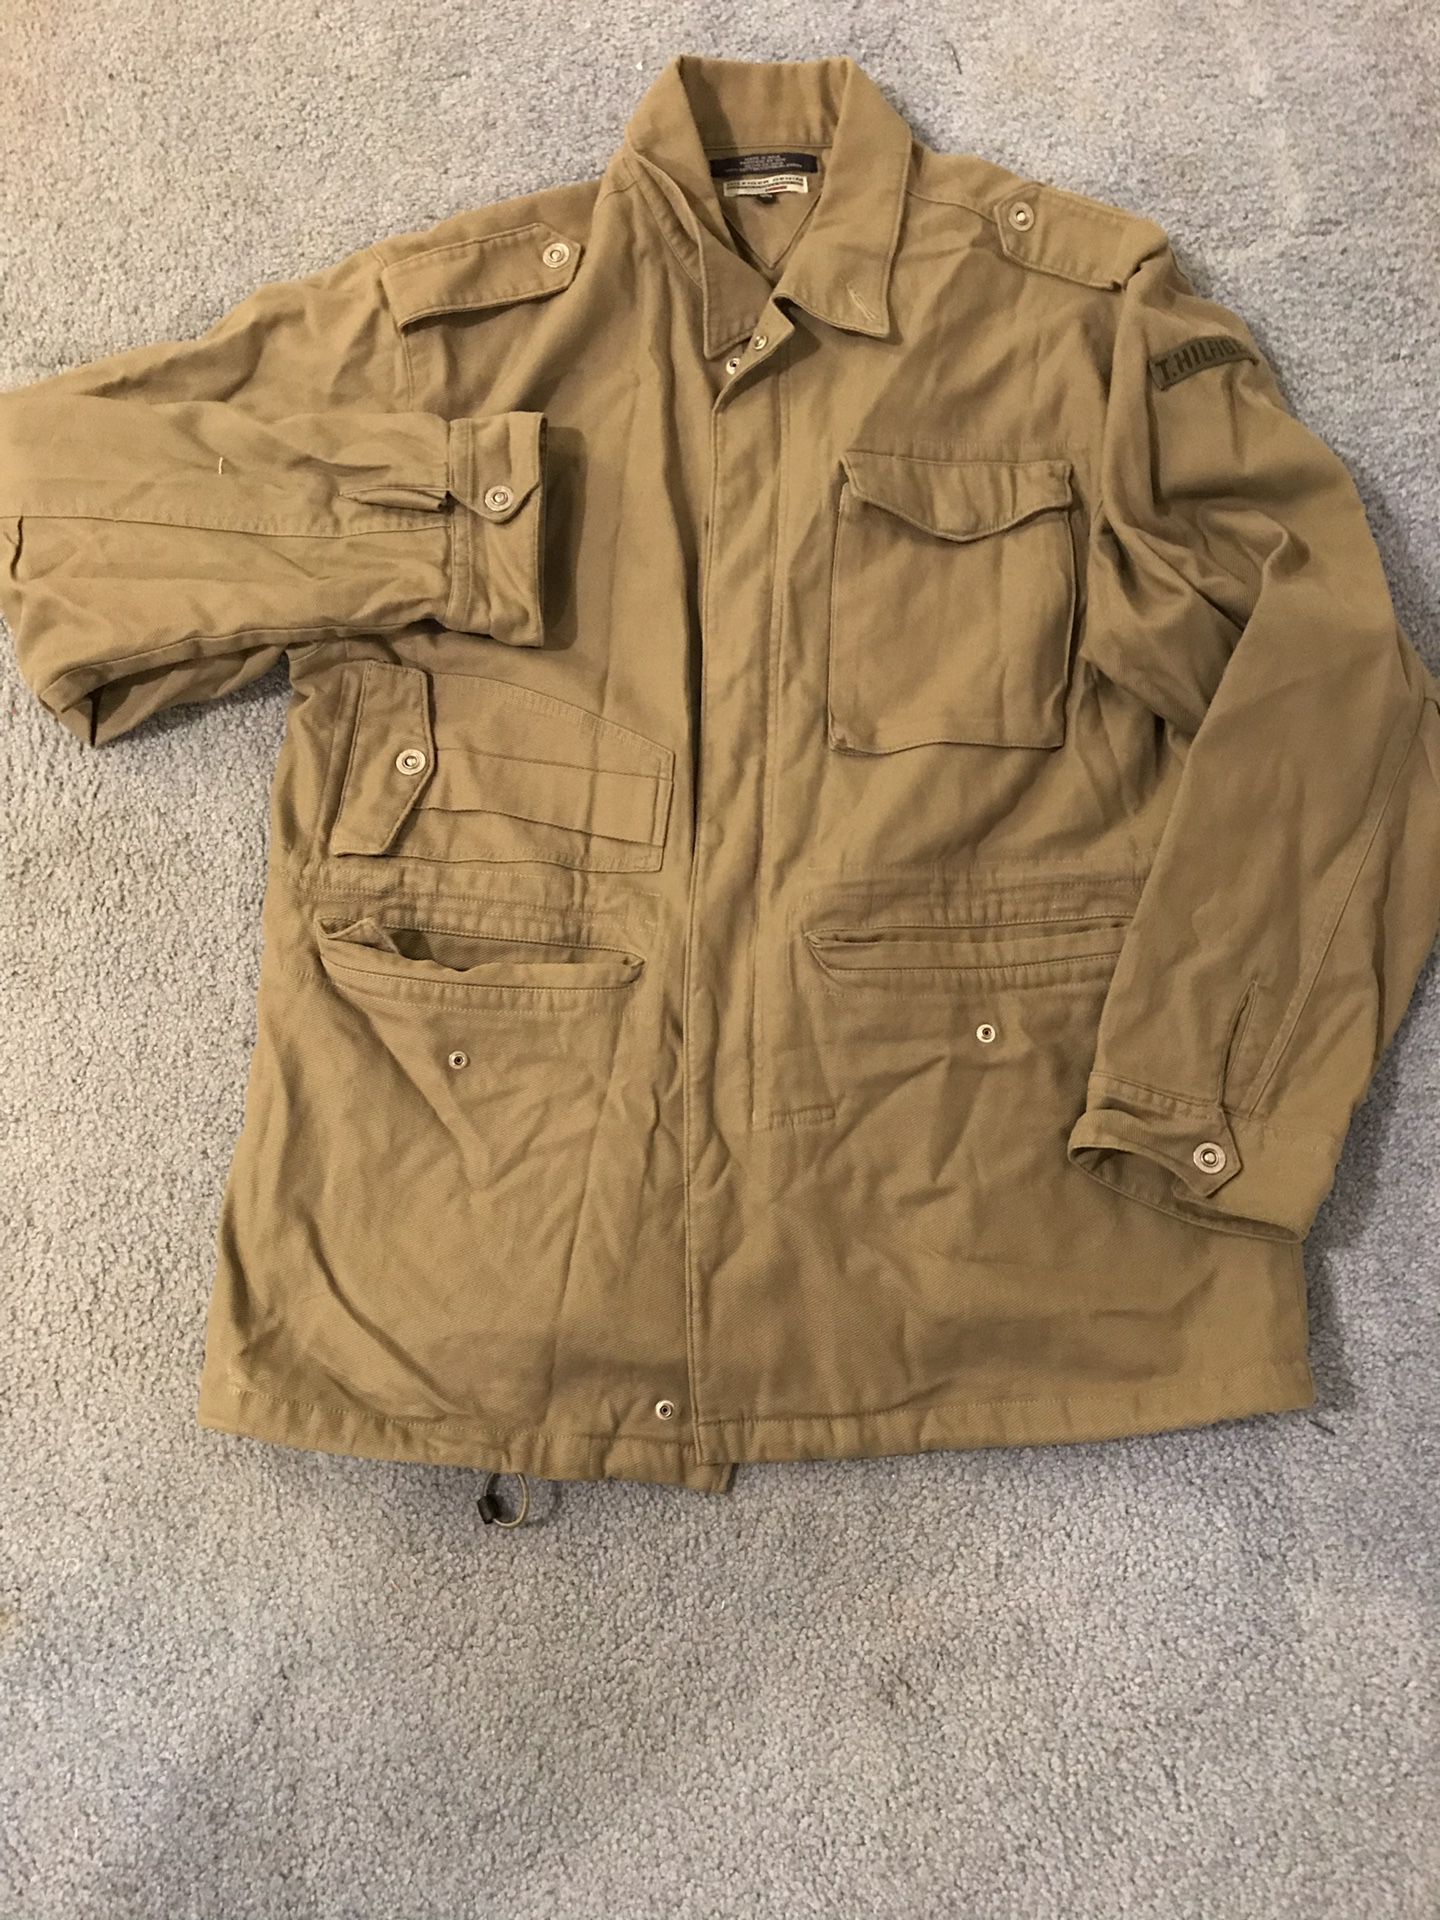 Tommy Hilfiger army jacket (classic) sz XL for Sale in Kent Cliffs, NY ...